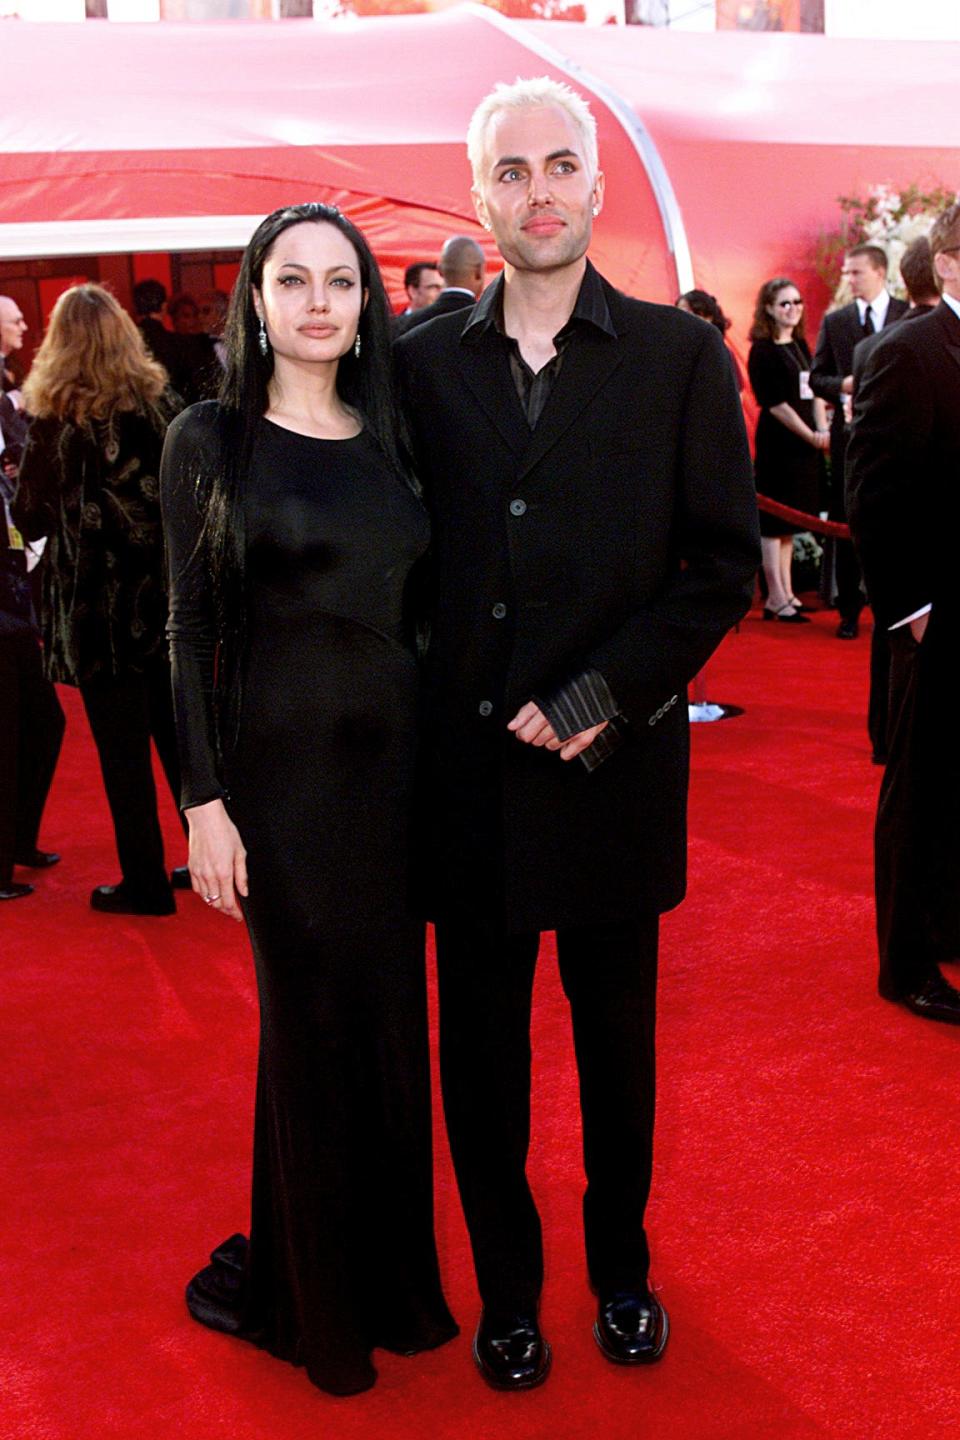 Angelina Jolie and her brother James Haven arrive at the 72nd annual Academy Awards in April 2000.